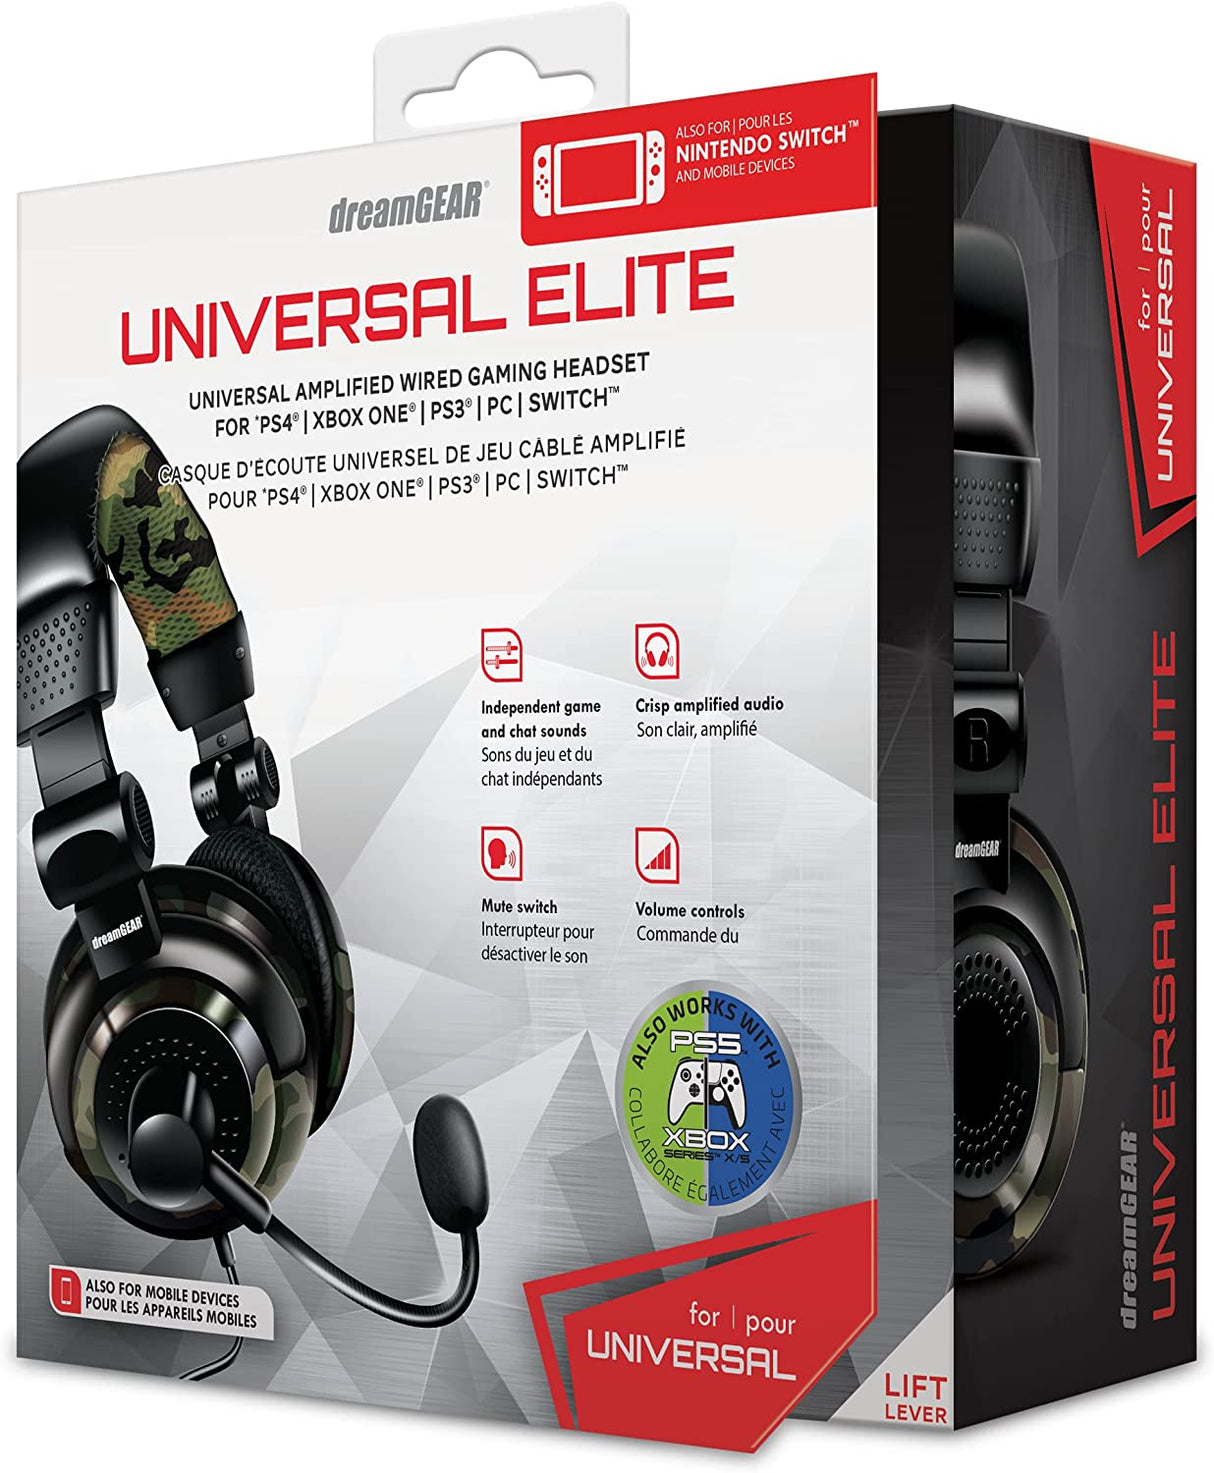 dreamGEAR Universal Elite Amplified, Wired Stereo Gaming Headset for PS4, Xbox One, PS3, Xbox 360, Wii, WiiU, and Even PC,DGUN-2574